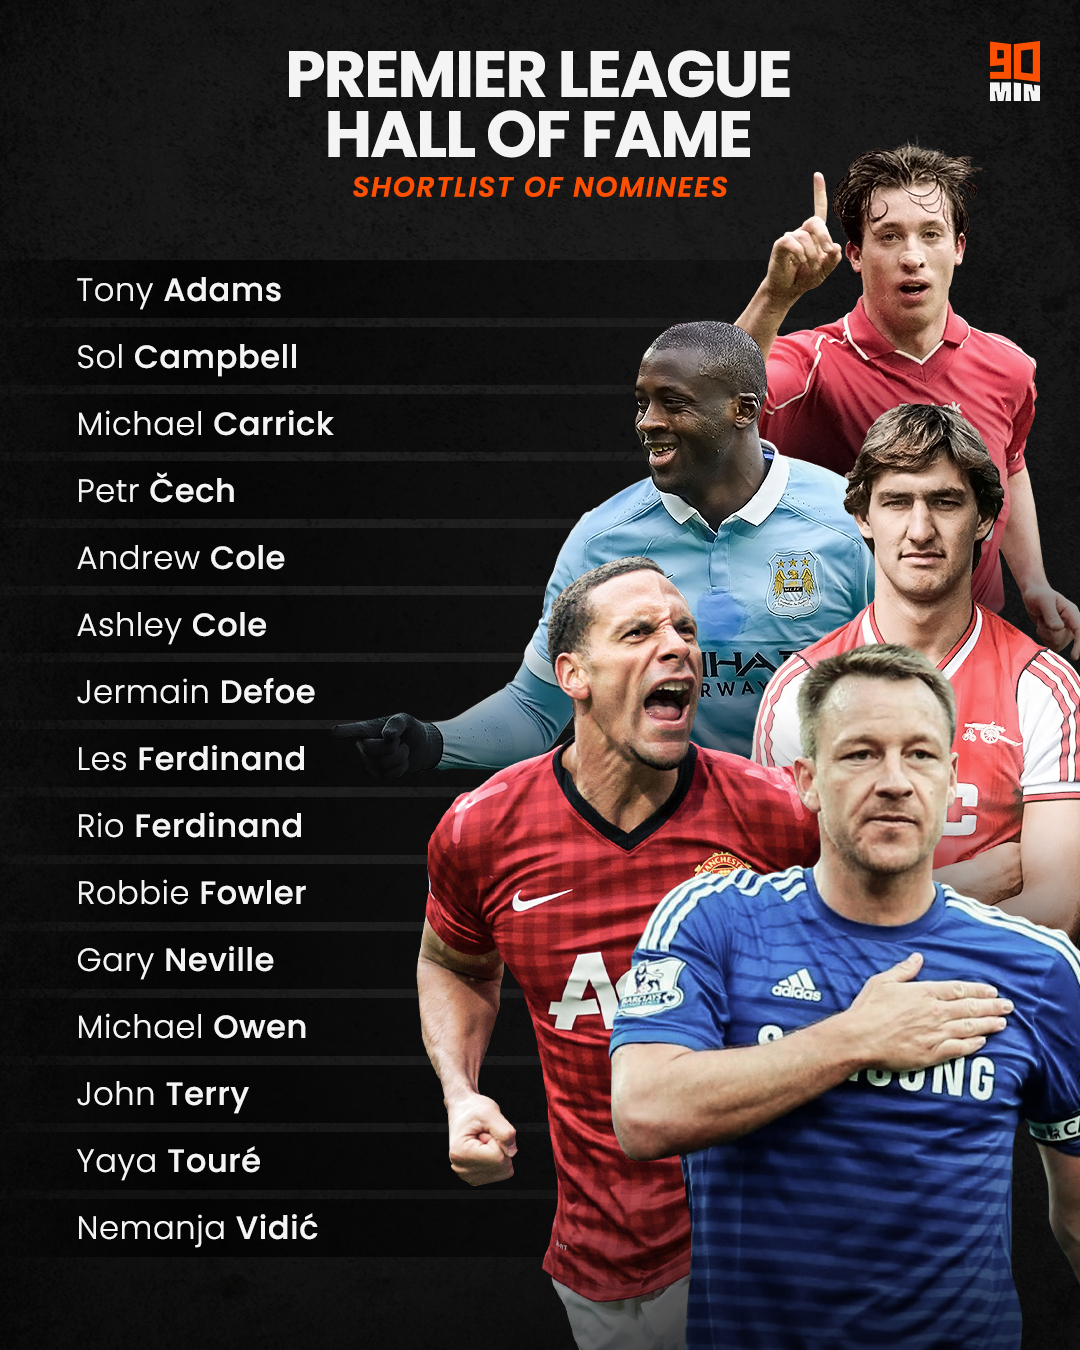 Top 10 legends for the Premier League Hall of Fame